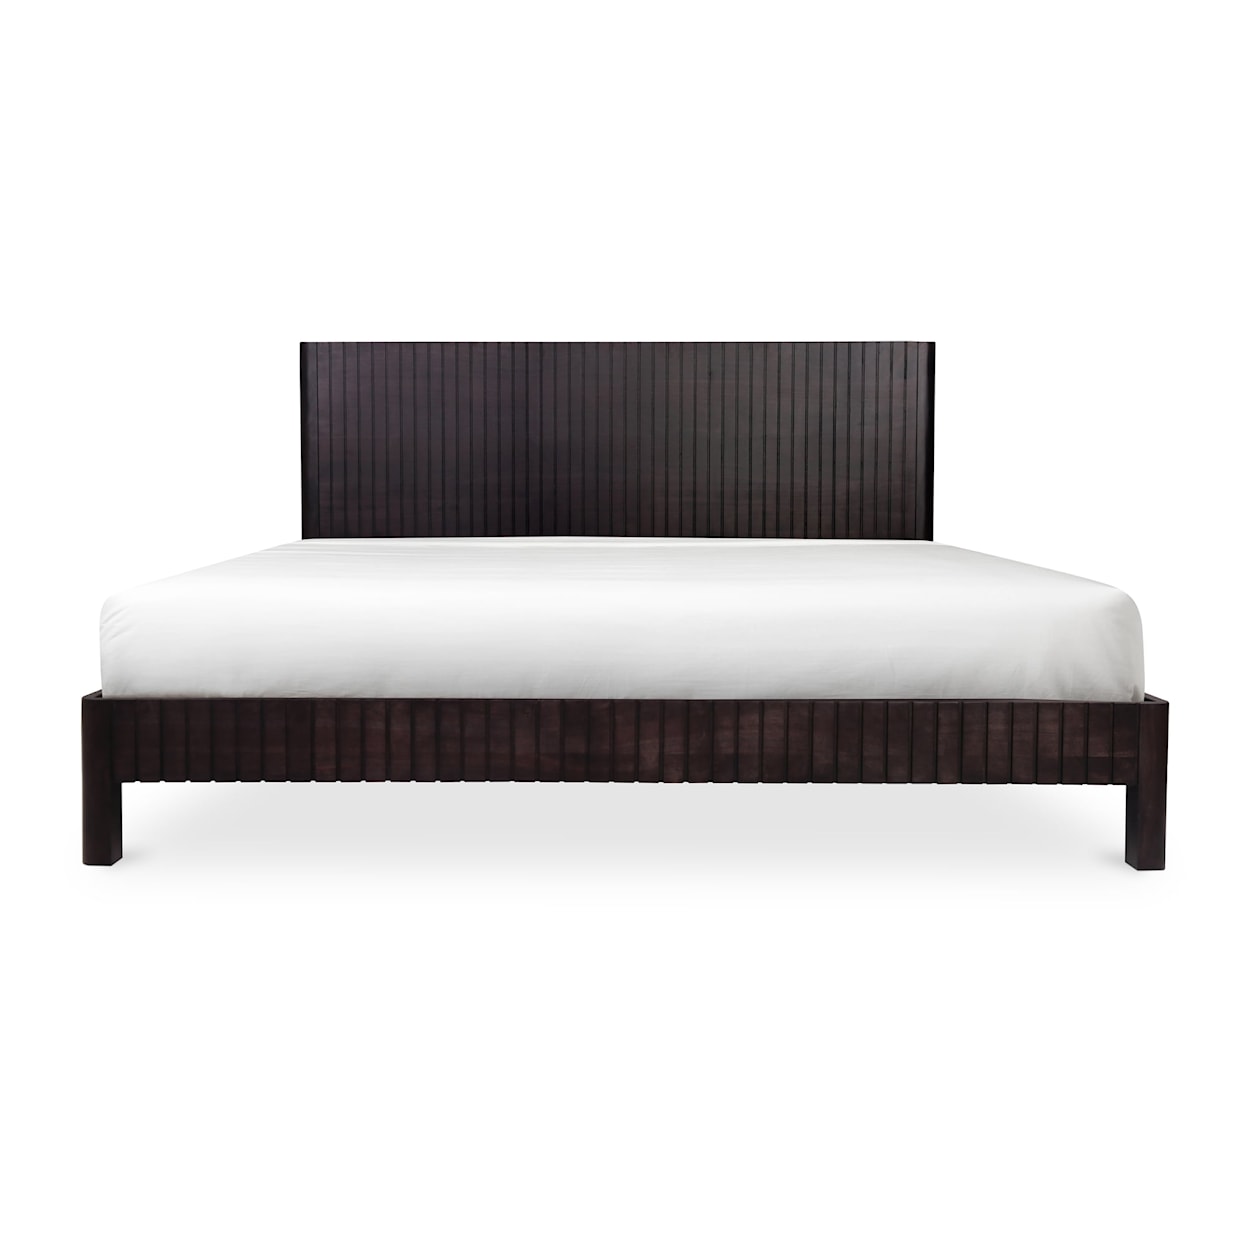 Moe's Home Collection Povera Queen Bed